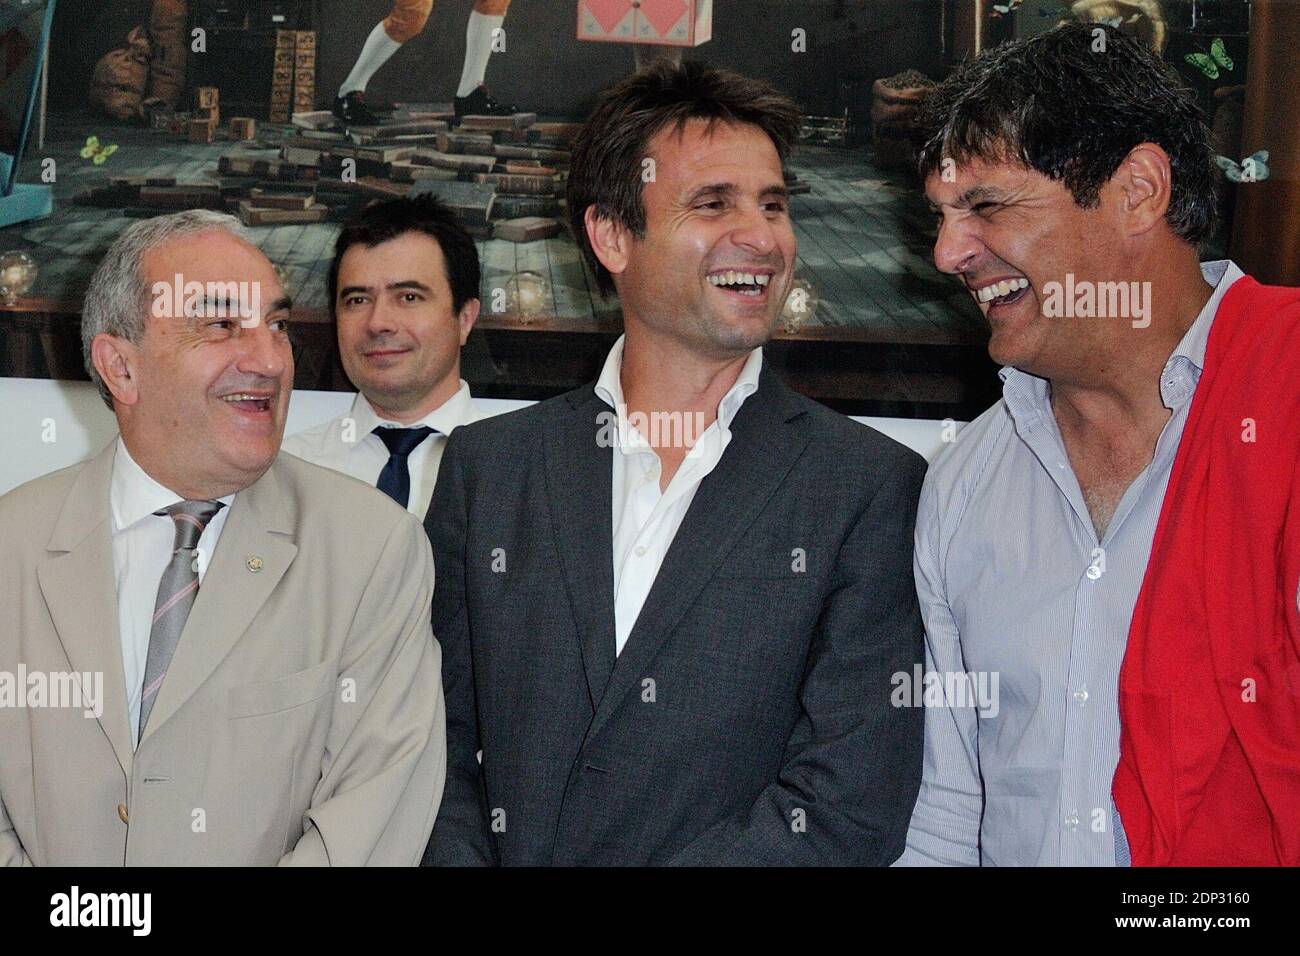 Giuseppe Lavazza, Jean Gachassin, Fabrice Santoro and Toni Nadal attending  the Lavazza coffee brand 120th anniversary party held at Le Village in  Roland Garros arena in Paris, France on May 26, 2015.